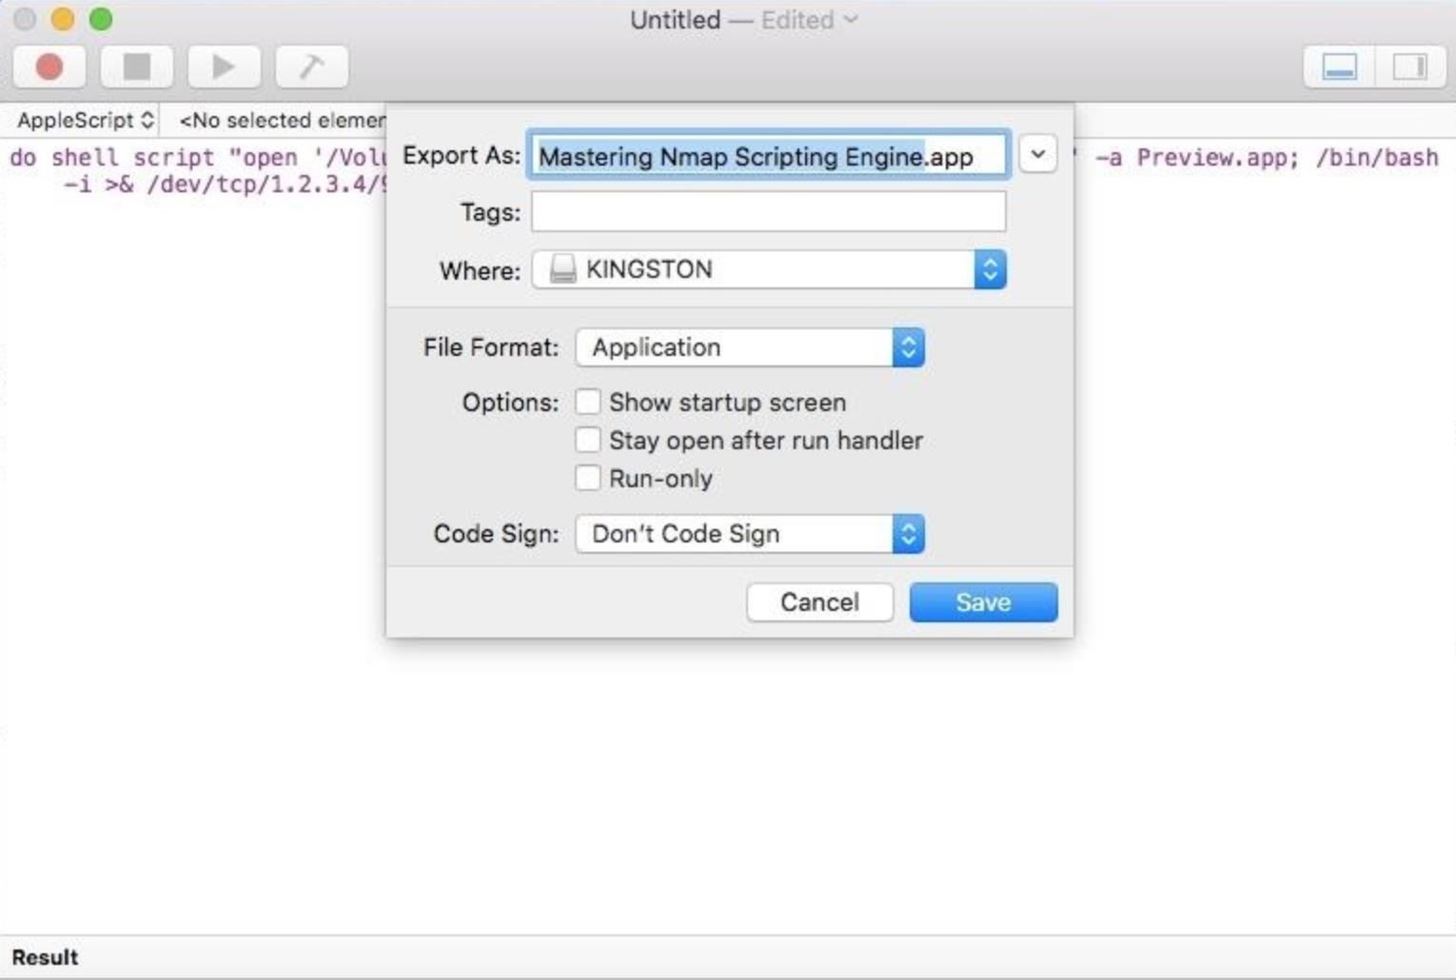 Hacking macOS: How to Spread Trojans & Pivot to Other Mac Computers